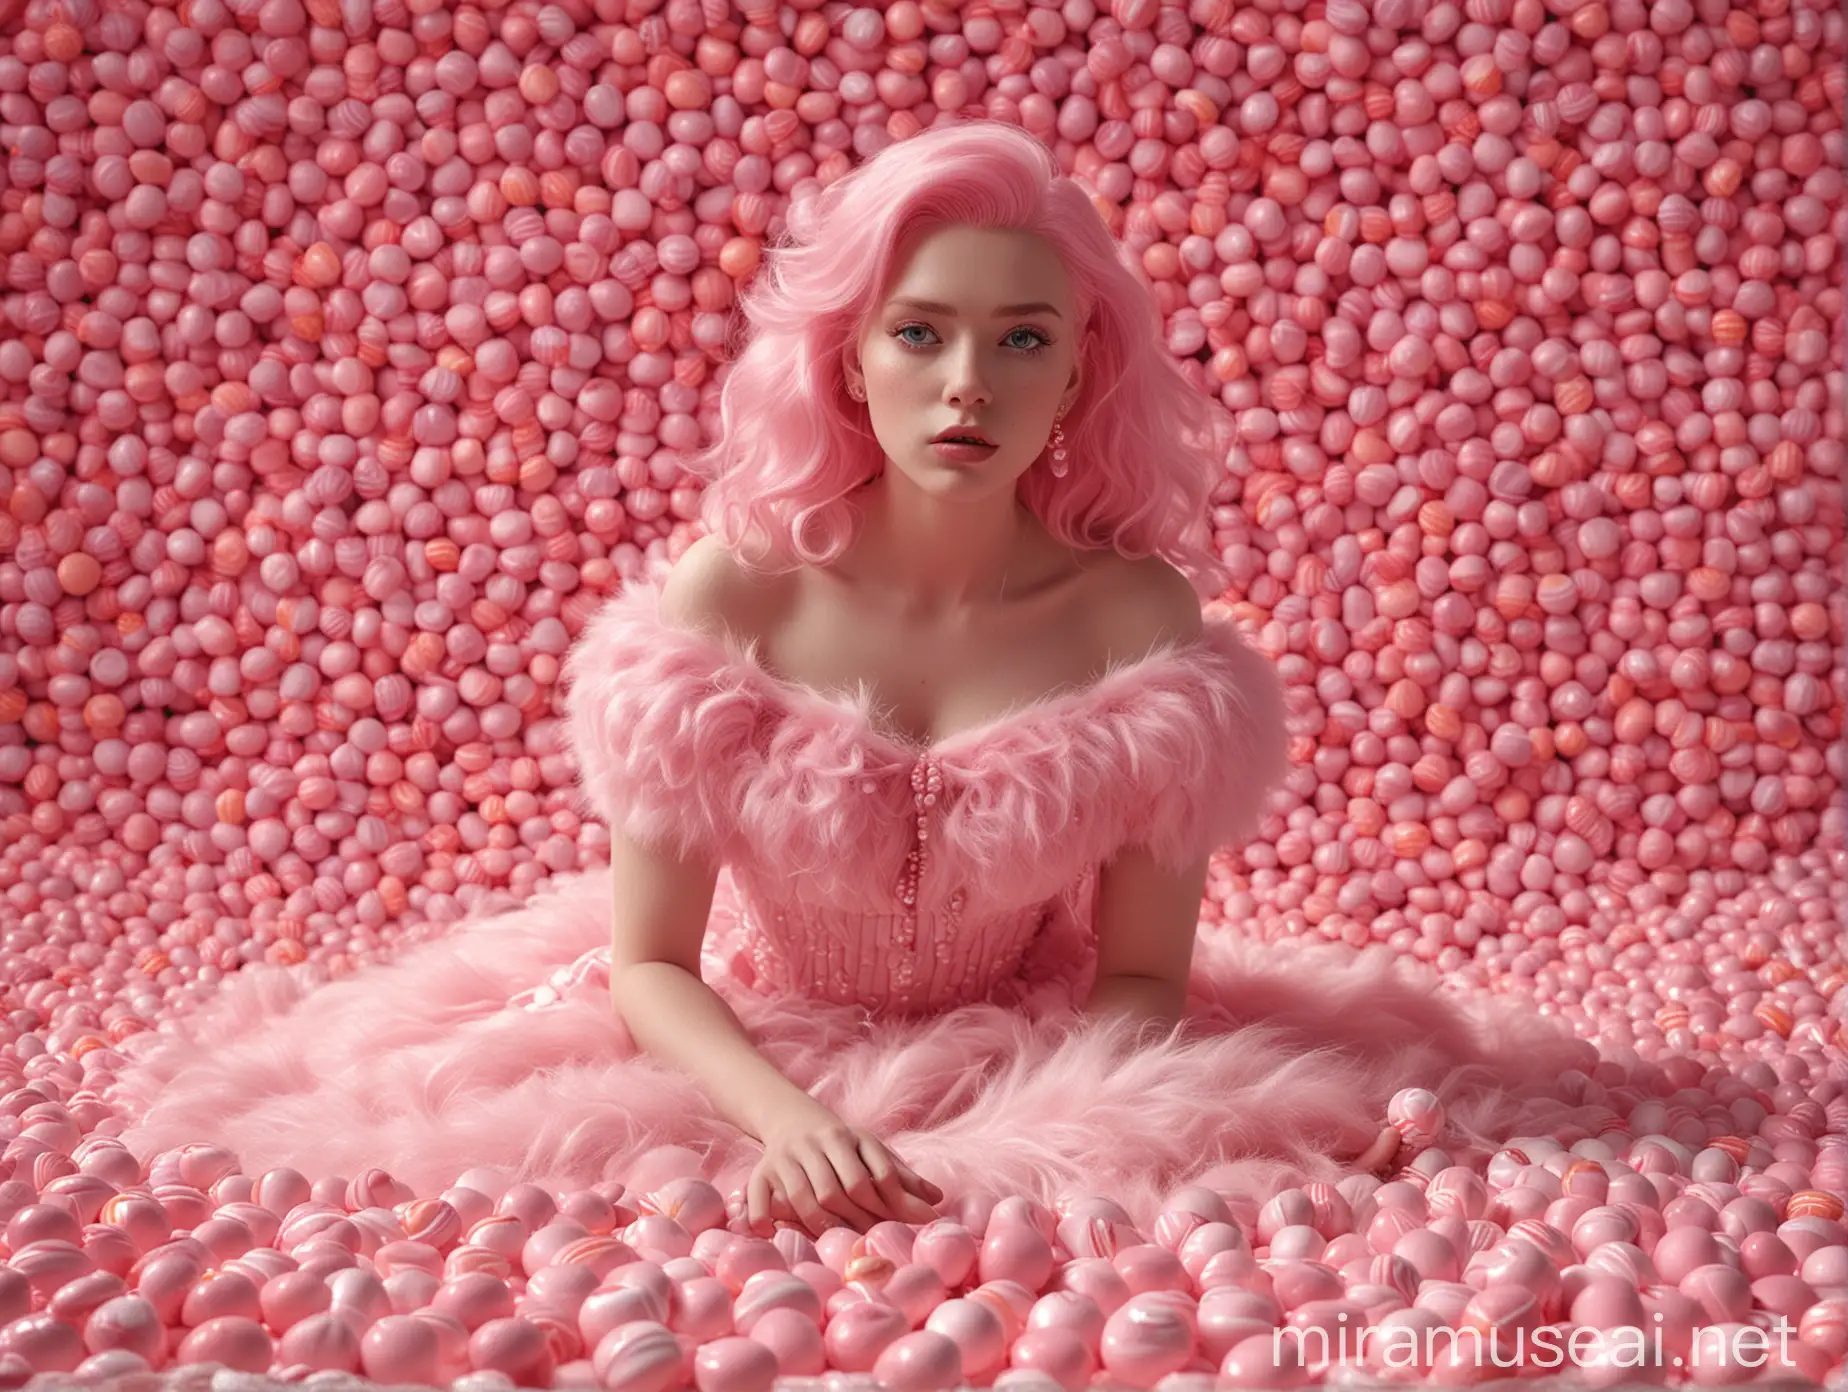 Create sculpture of a pink-haired woman, surrounded by candy. The woman must be sitting in a field of cream. Haute couture, old photography, cinematic, soft fur. The character must be wearing a candy-colored dress and accessories such as chubbies or skittles. Sweet concept, cinematics, soft fur, extremely detailed.